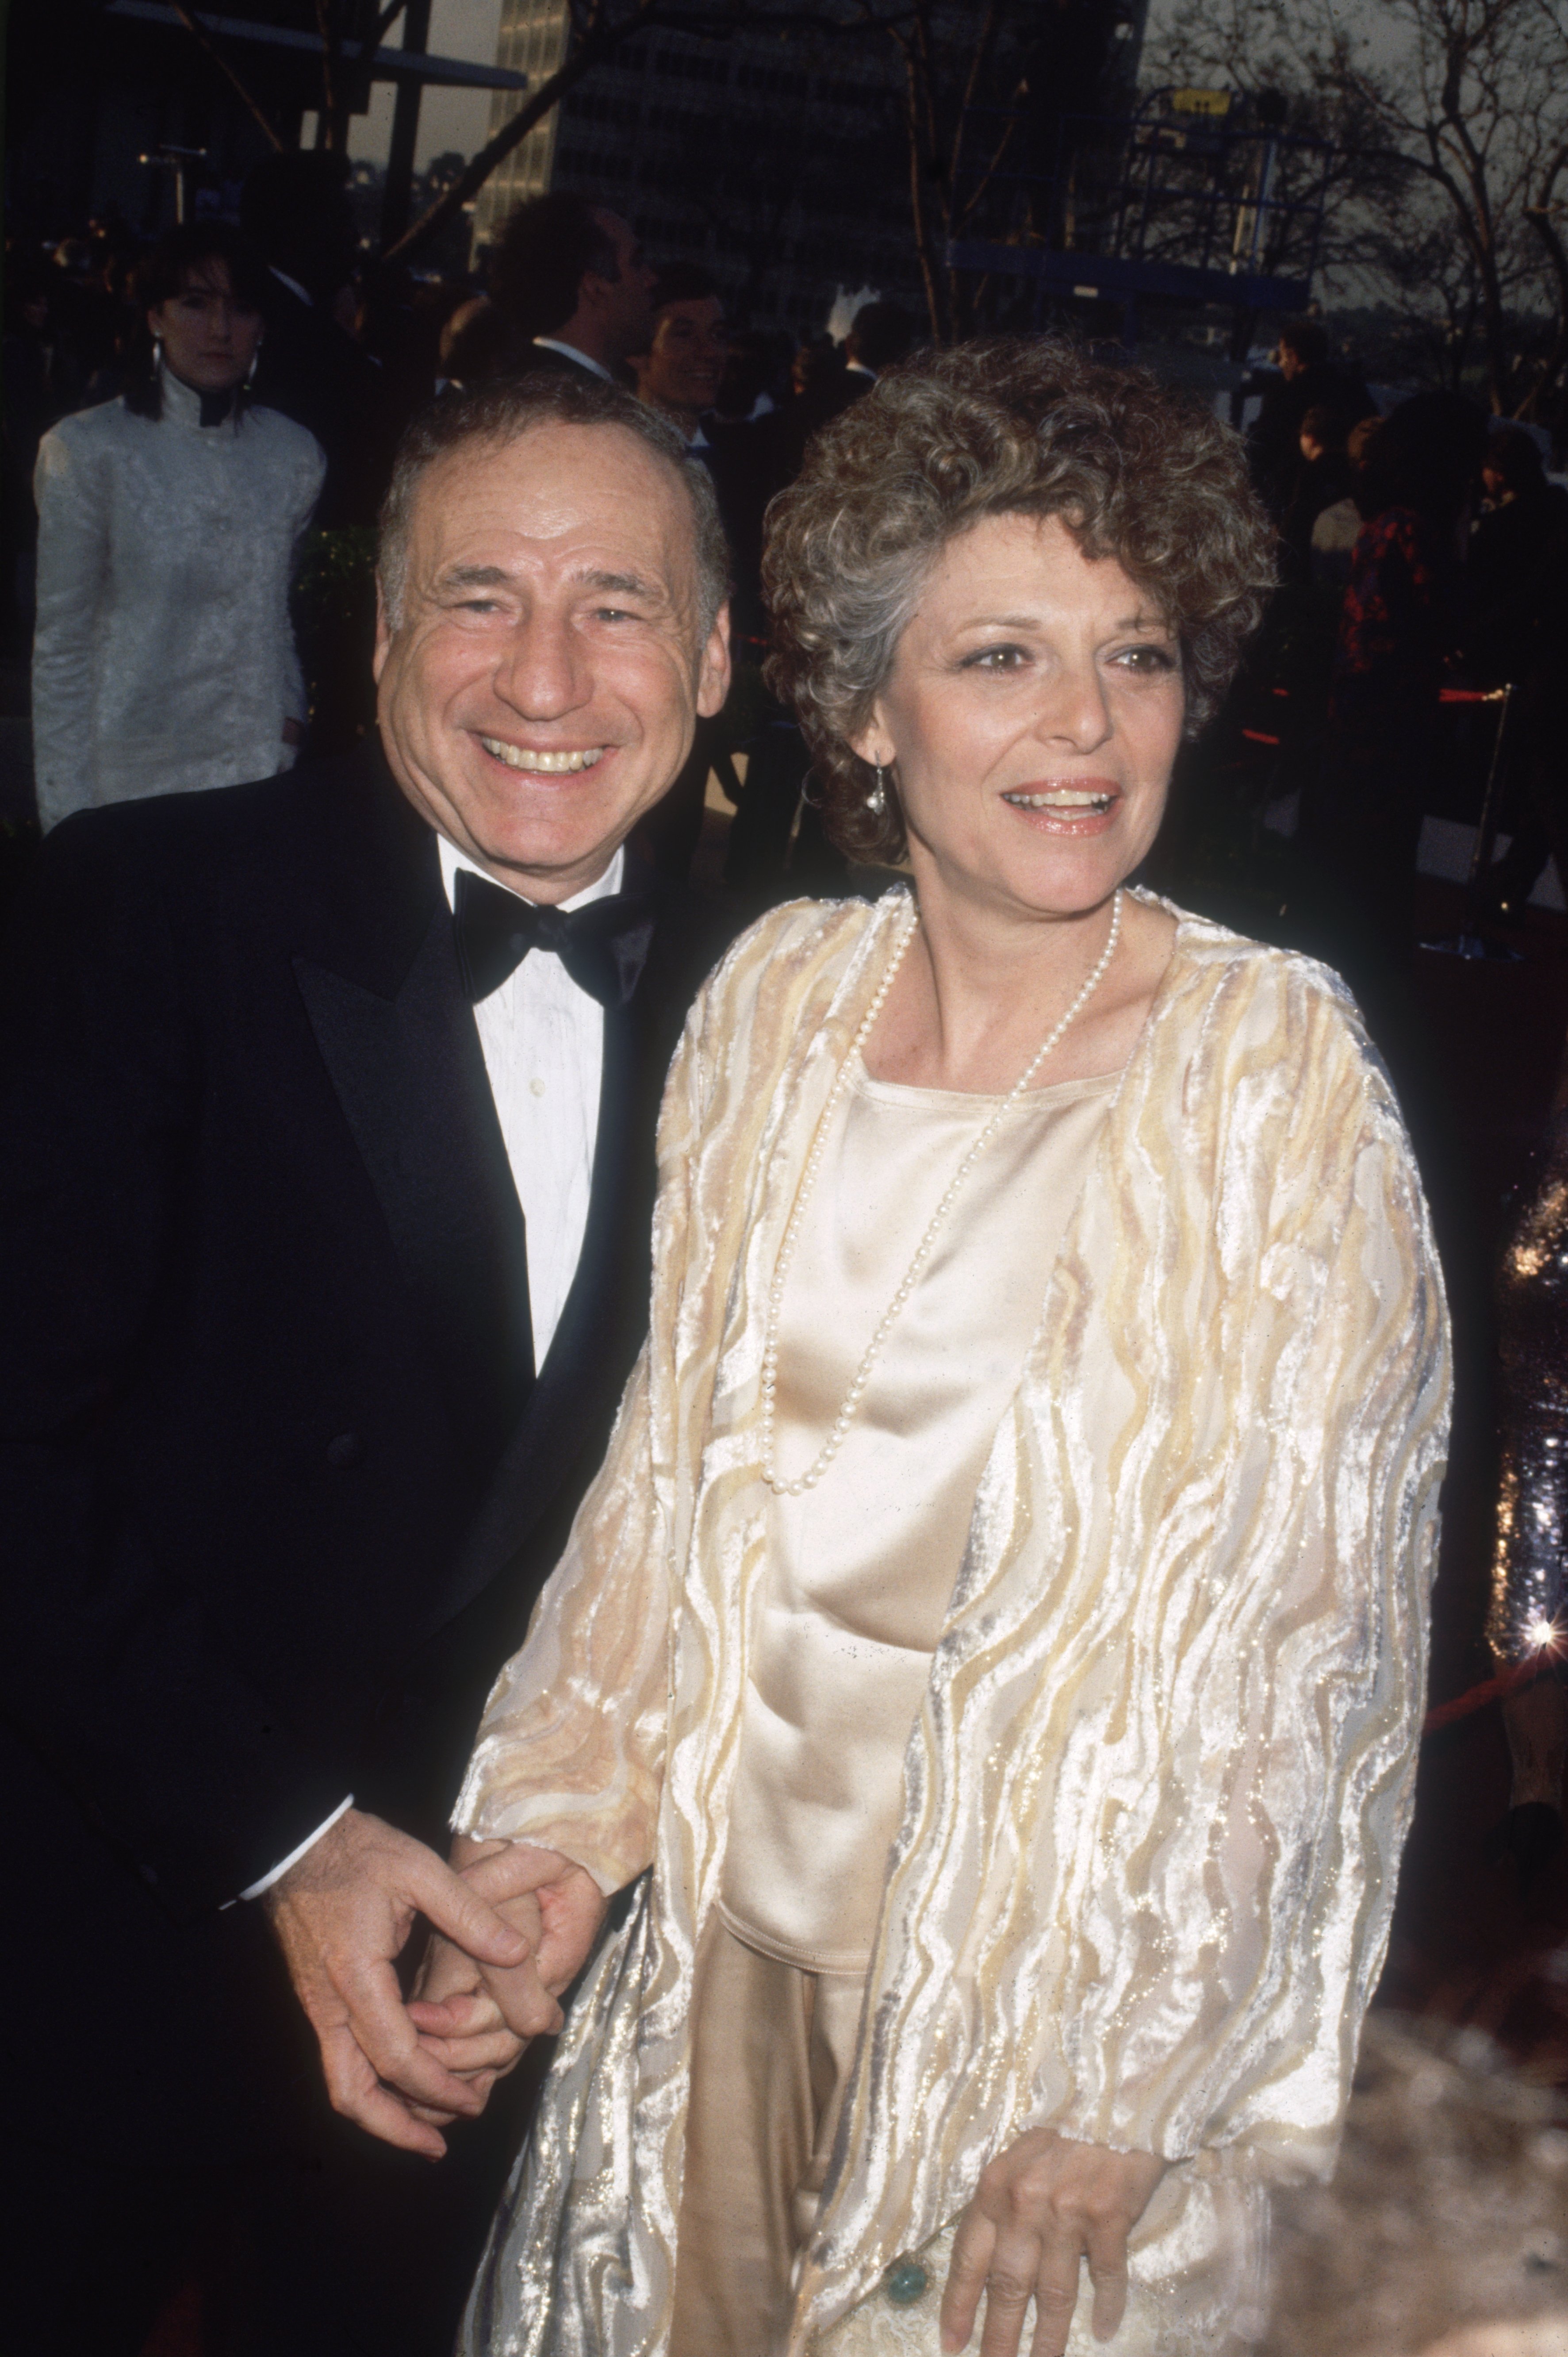 Mel Brooks and Anne Bancroft attend the Academy Awards on March 24, 1986 in Los Angeles, California ┃Source: Getty Images